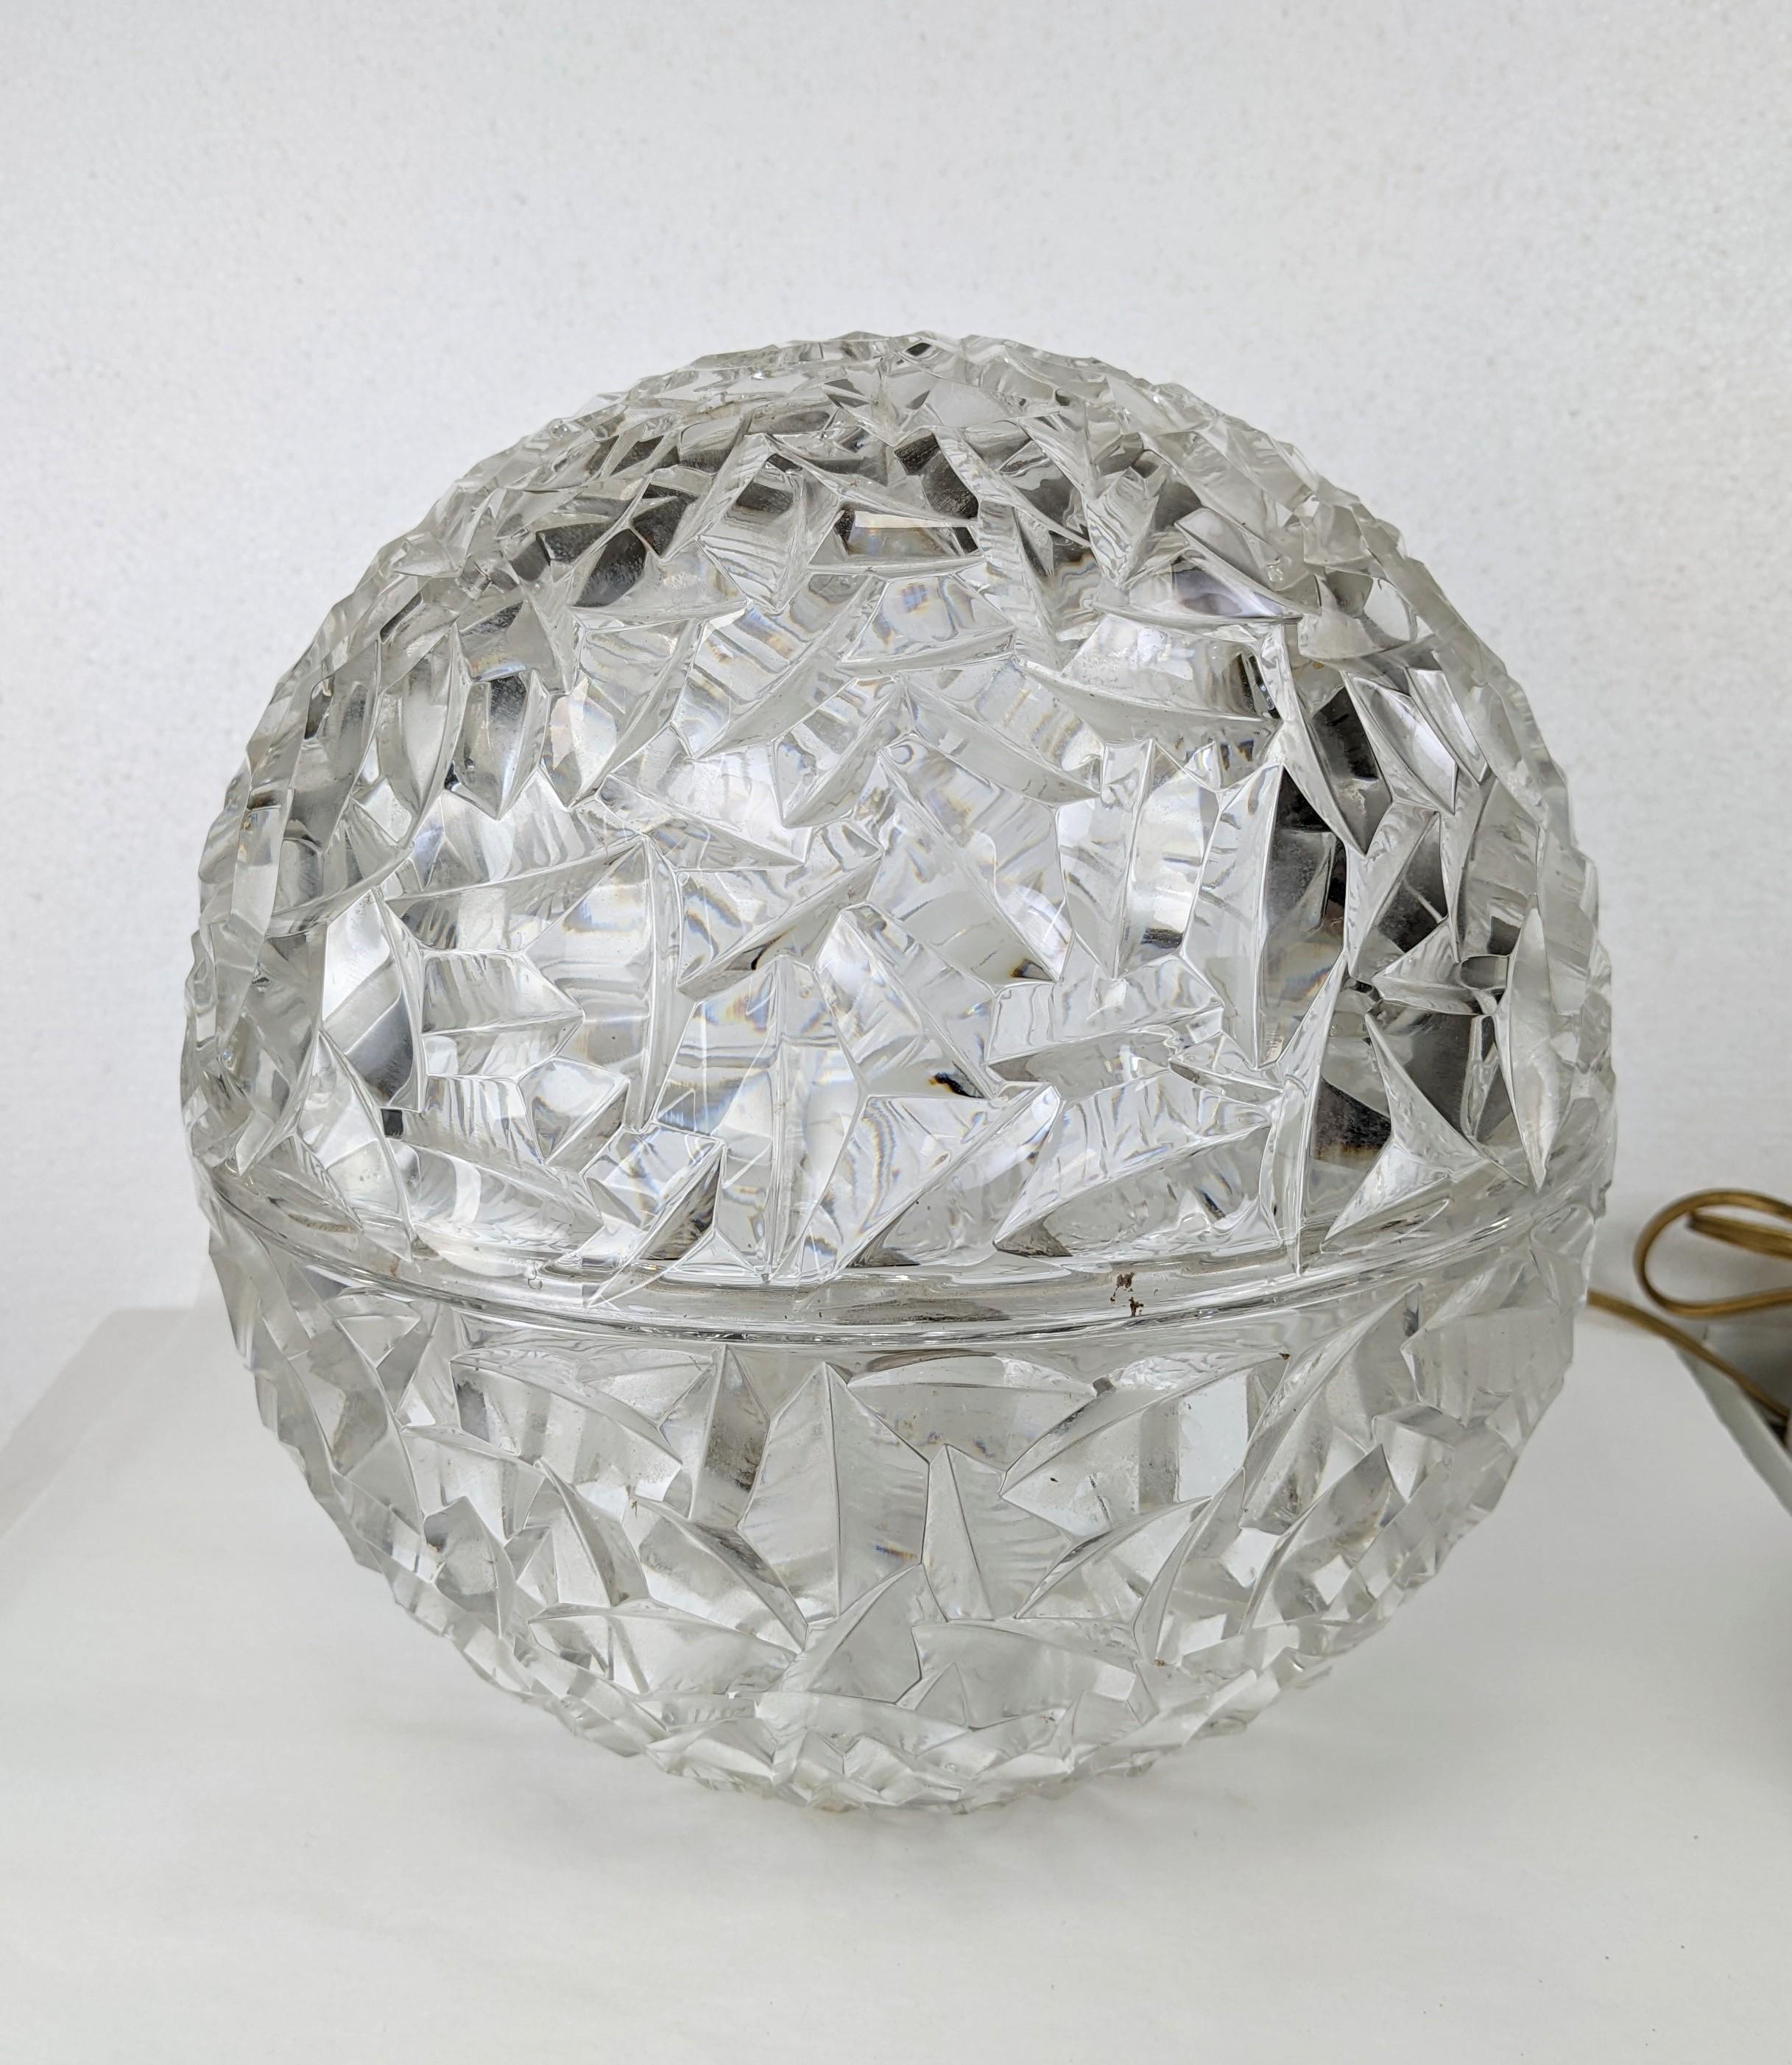 Striking and elegant Faceted crystal globe lamp from the 1950's, likely European. Top comes off for access to change of bulb. Art Deco overtones with the faceted chipped ice look. Heavy quality glass.